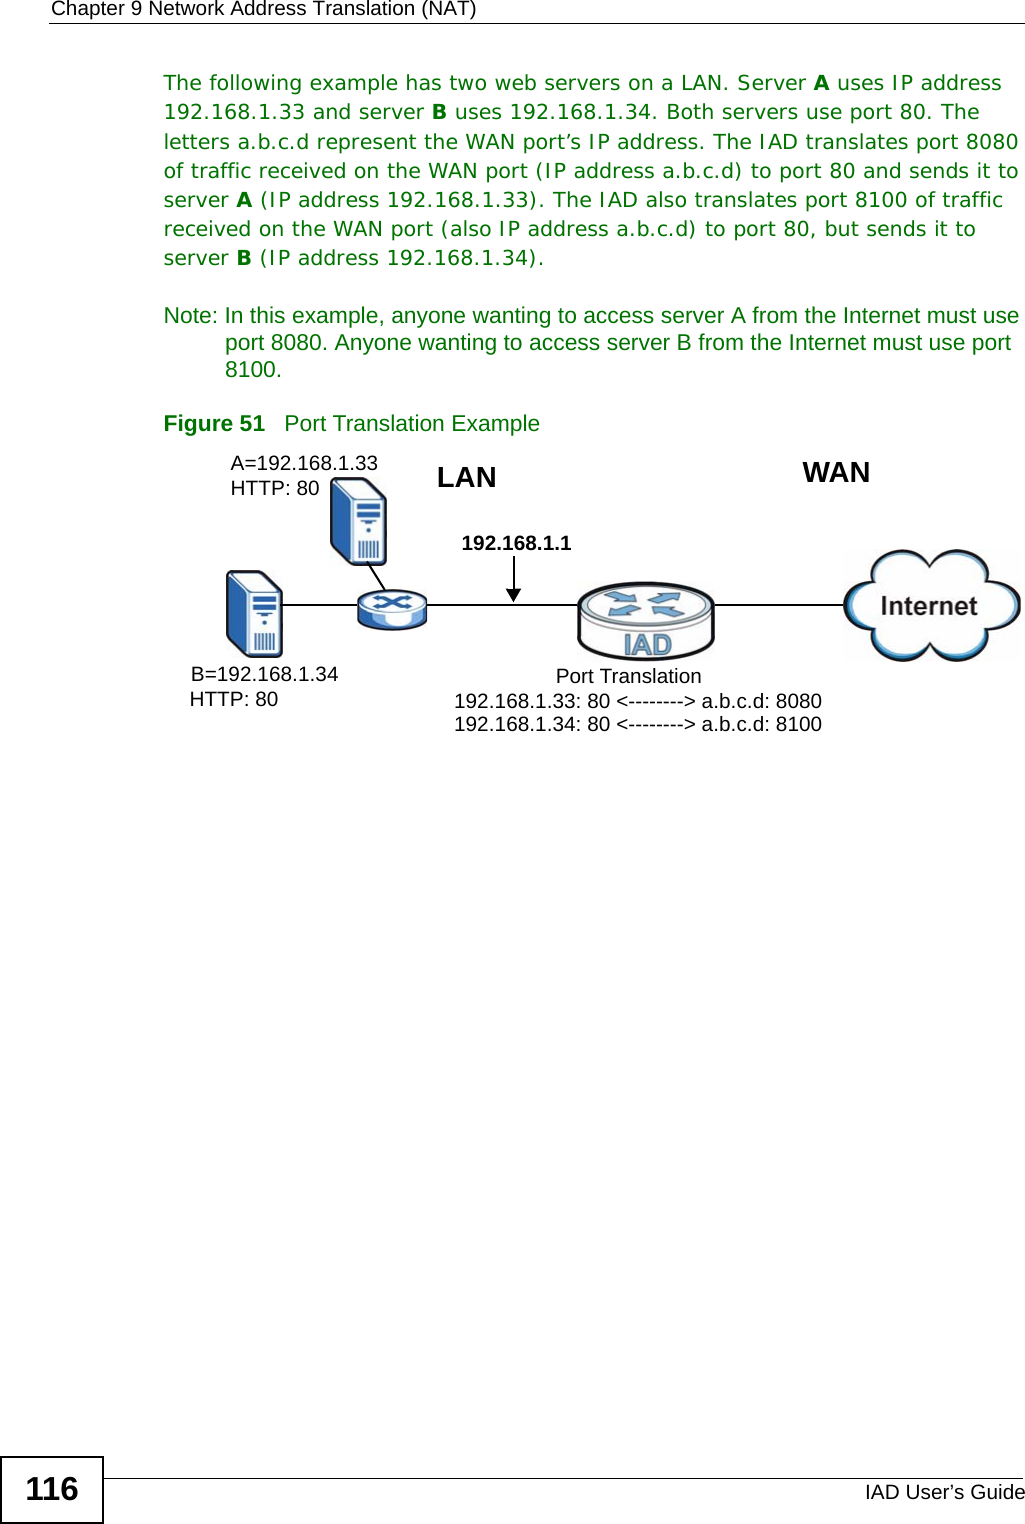 Chapter 9 Network Address Translation (NAT)IAD User’s Guide116The following example has two web servers on a LAN. Server A uses IP address 192.168.1.33 and server B uses 192.168.1.34. Both servers use port 80. The letters a.b.c.d represent the WAN port’s IP address. The IAD translates port 8080 of traffic received on the WAN port (IP address a.b.c.d) to port 80 and sends it to server A (IP address 192.168.1.33). The IAD also translates port 8100 of traffic received on the WAN port (also IP address a.b.c.d) to port 80, but sends it to server B (IP address 192.168.1.34). Note: In this example, anyone wanting to access server A from the Internet must use port 8080. Anyone wanting to access server B from the Internet must use port 8100.Figure 51   Port Translation ExampleA=192.168.1.33B=192.168.1.34WANLAN192.168.1.1HTTP: 80HTTP: 80 Port Translation192.168.1.33: 80 &lt;--------&gt; a.b.c.d: 8080192.168.1.34: 80 &lt;--------&gt; a.b.c.d: 8100